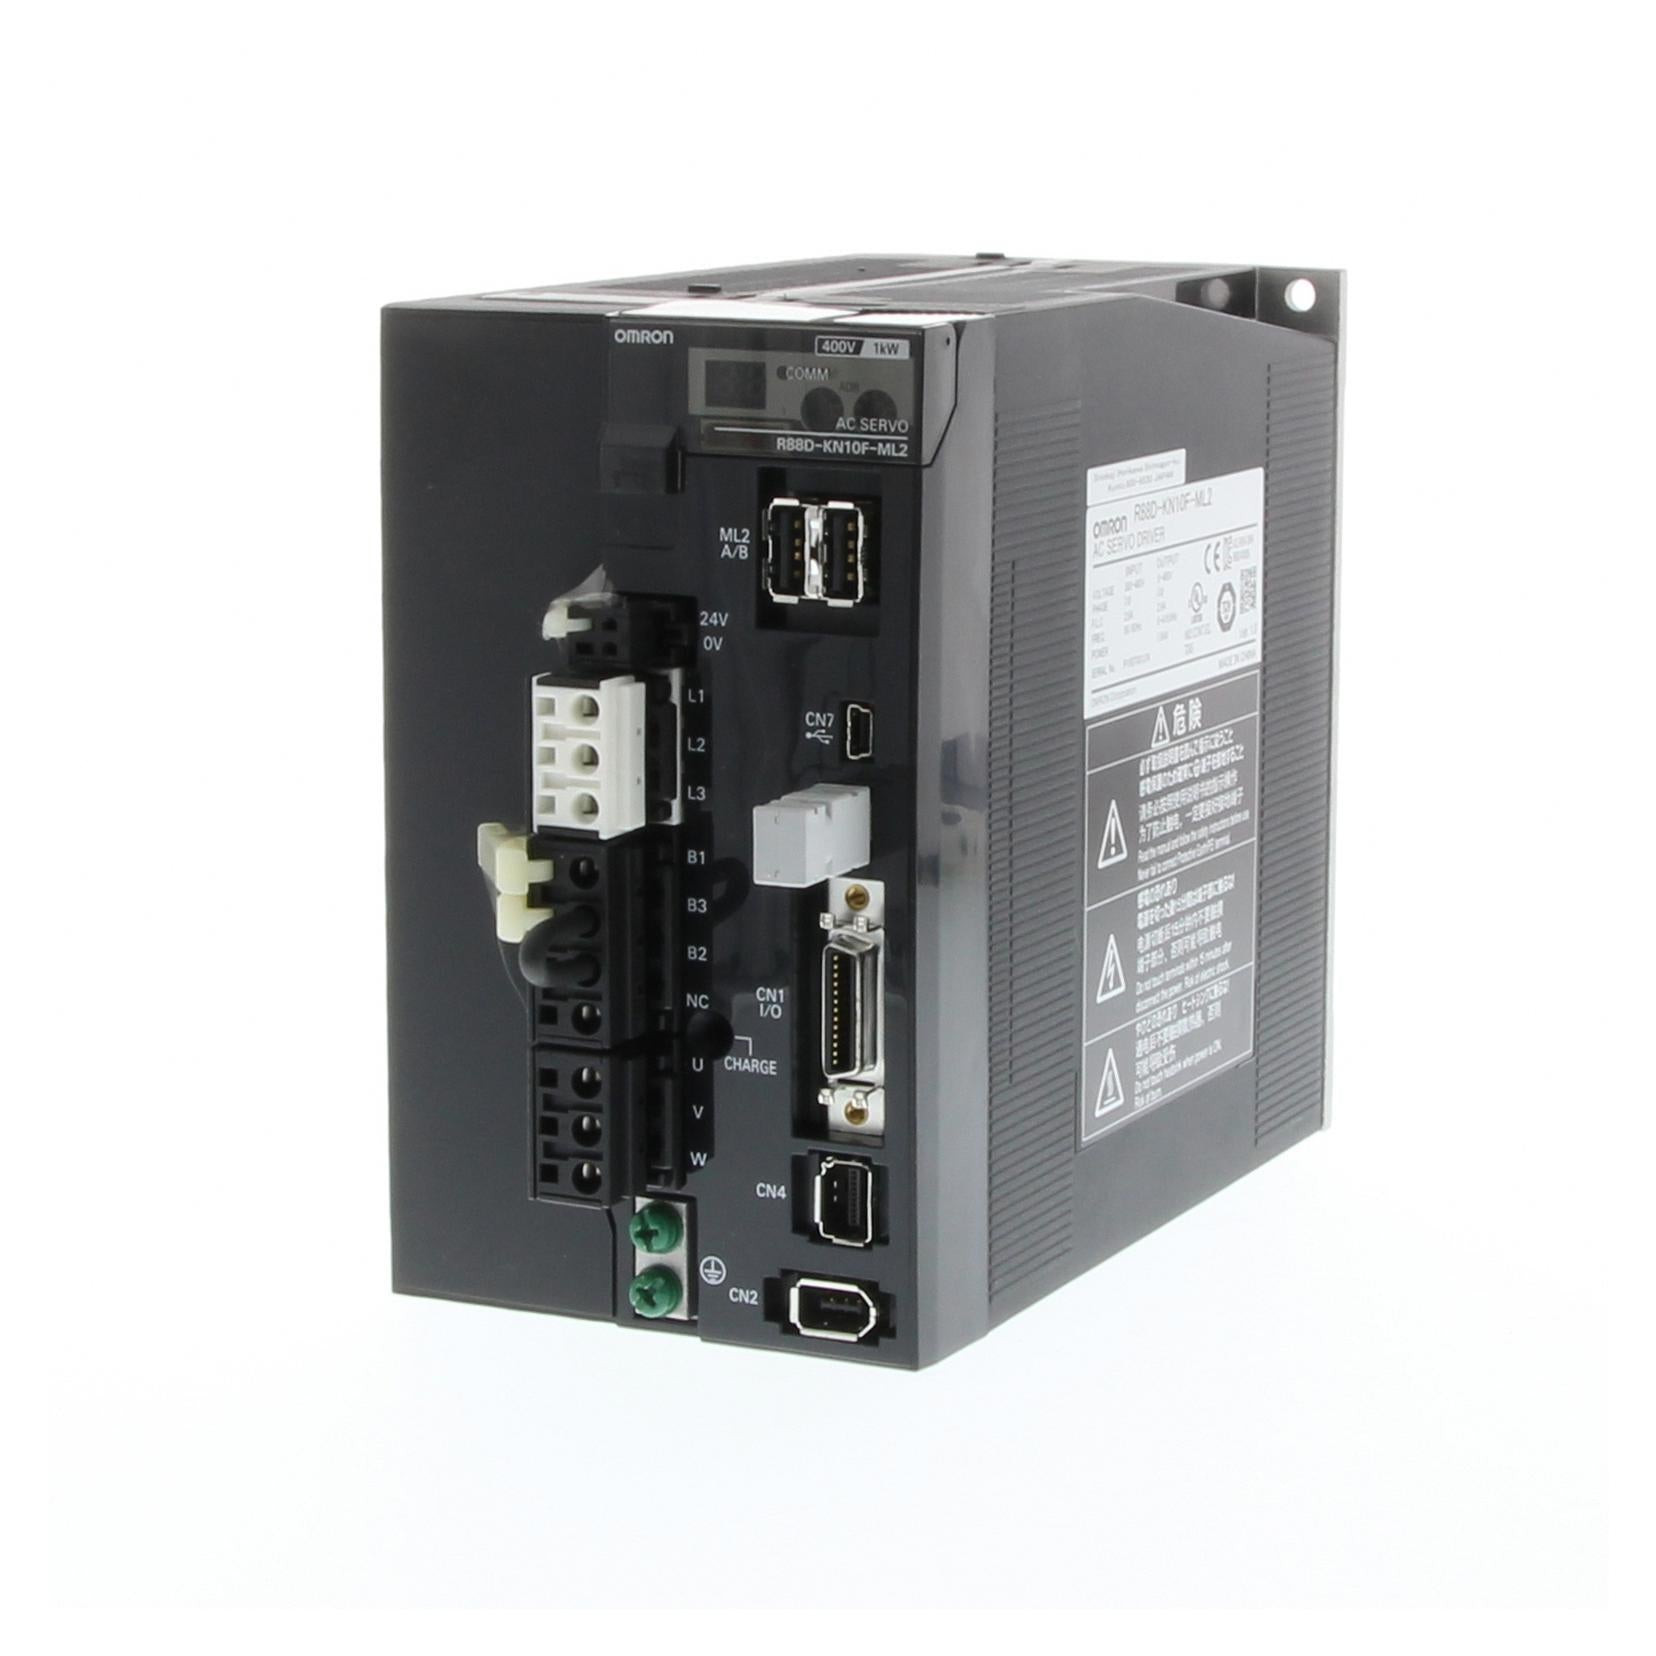 R88D-KN30F-ML2 AC MOTOR SPEED CONTROLLERS OMRON